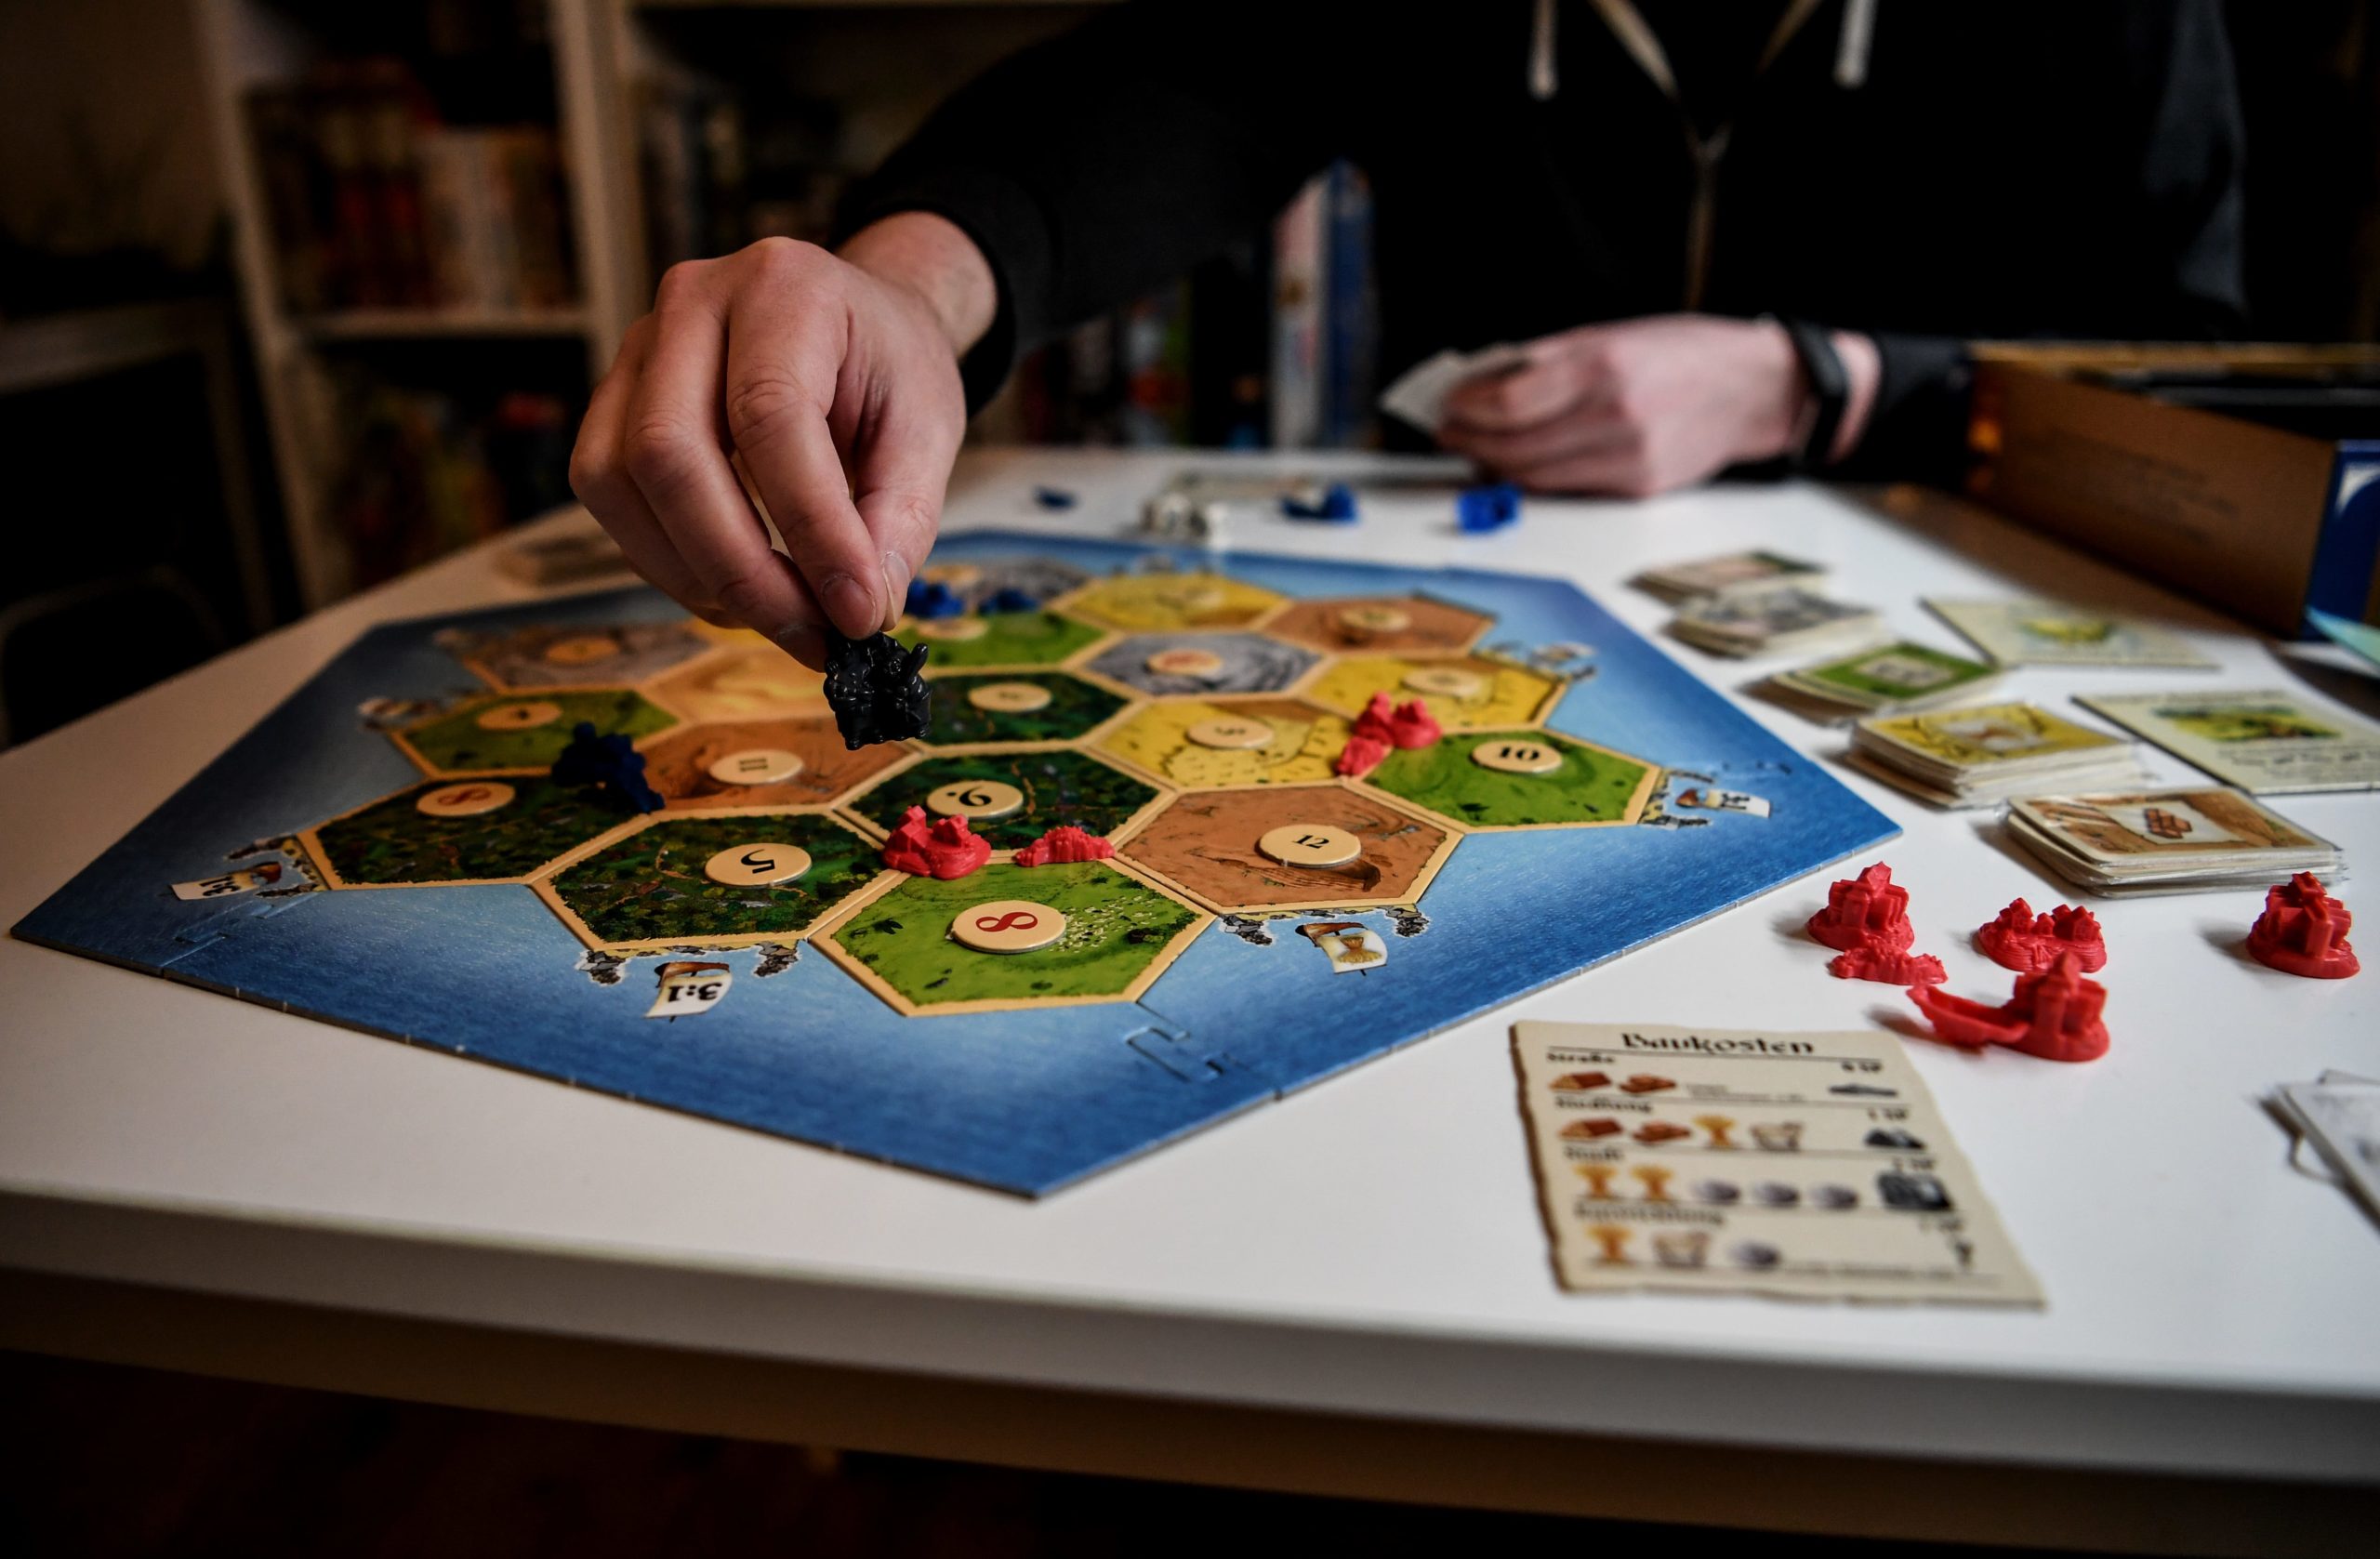 30 April 2020, Berlin: Tim Overkamp shows the game "Settlers of Catan" in the Ludothek "Spielwiese". In the "Spielwiese" he and his team lend out about 1500 games. To dpa-korr "Game lenders: Don't let the fun of the game be spoiled". Photo: Britta Pedersen/dpa-Zentralbild/ZB (Photo by Britta Pedersen/picture alliance via Getty Images)